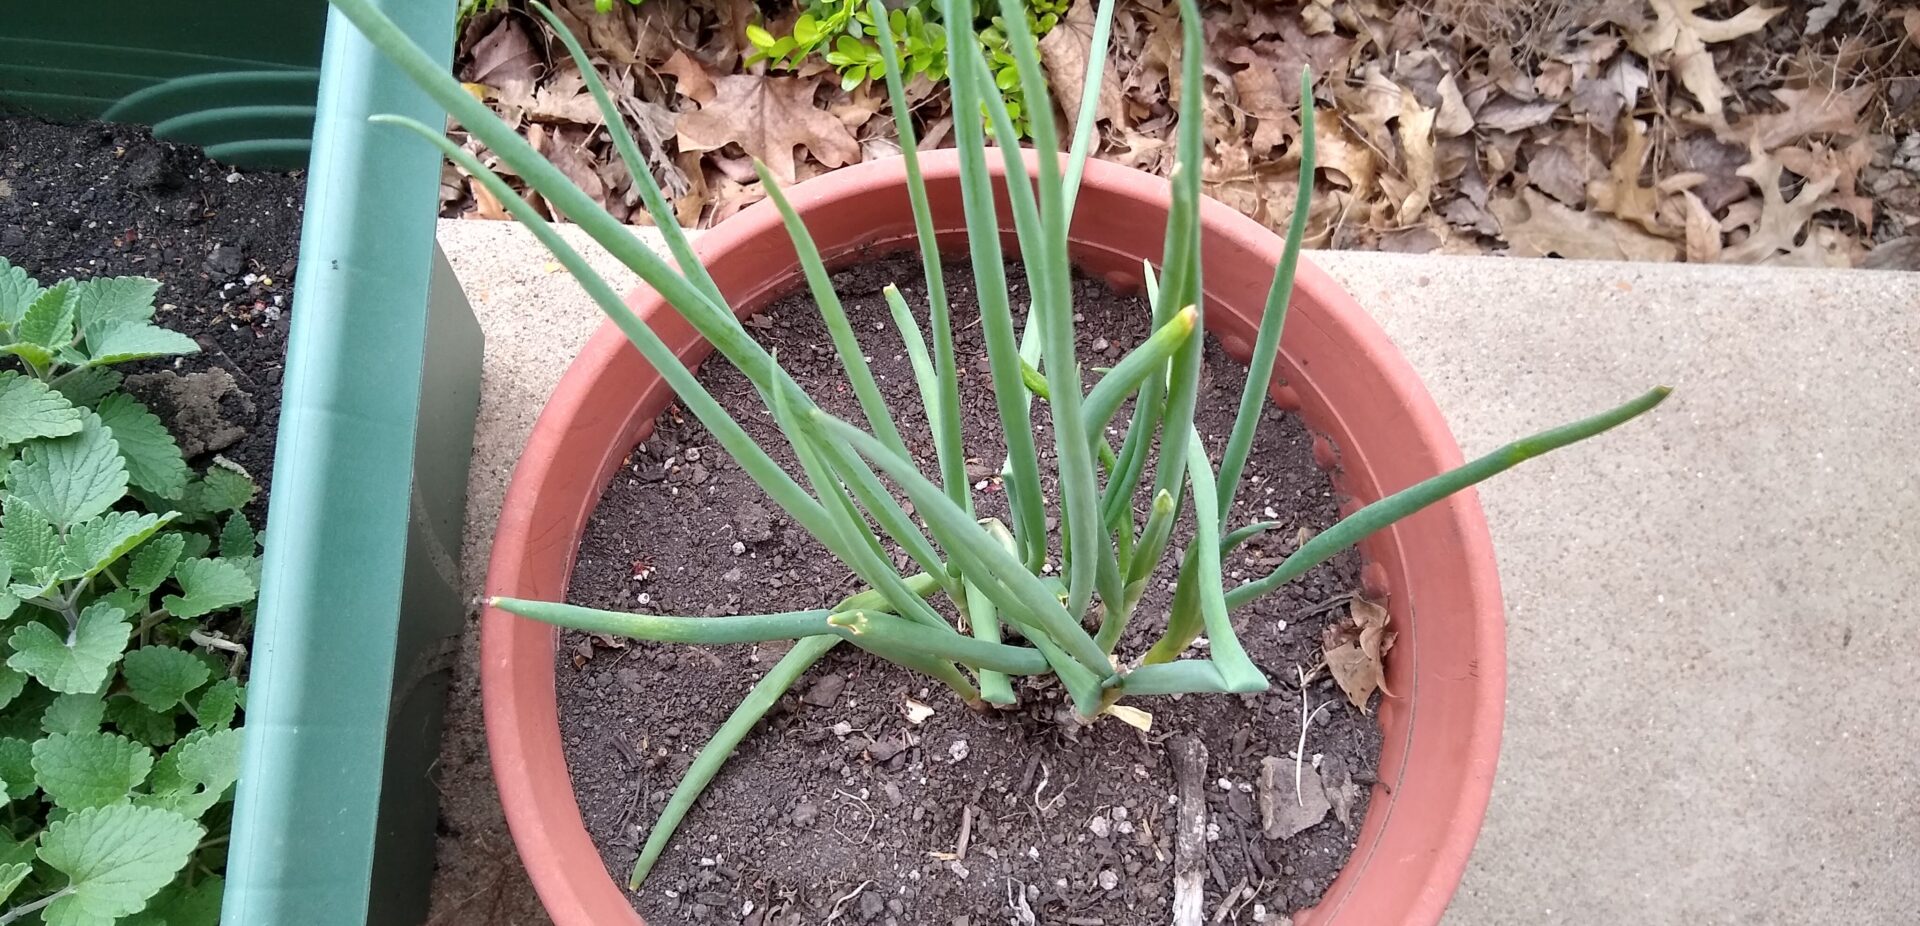 How to Regrow Green Onions From the Grocery Store